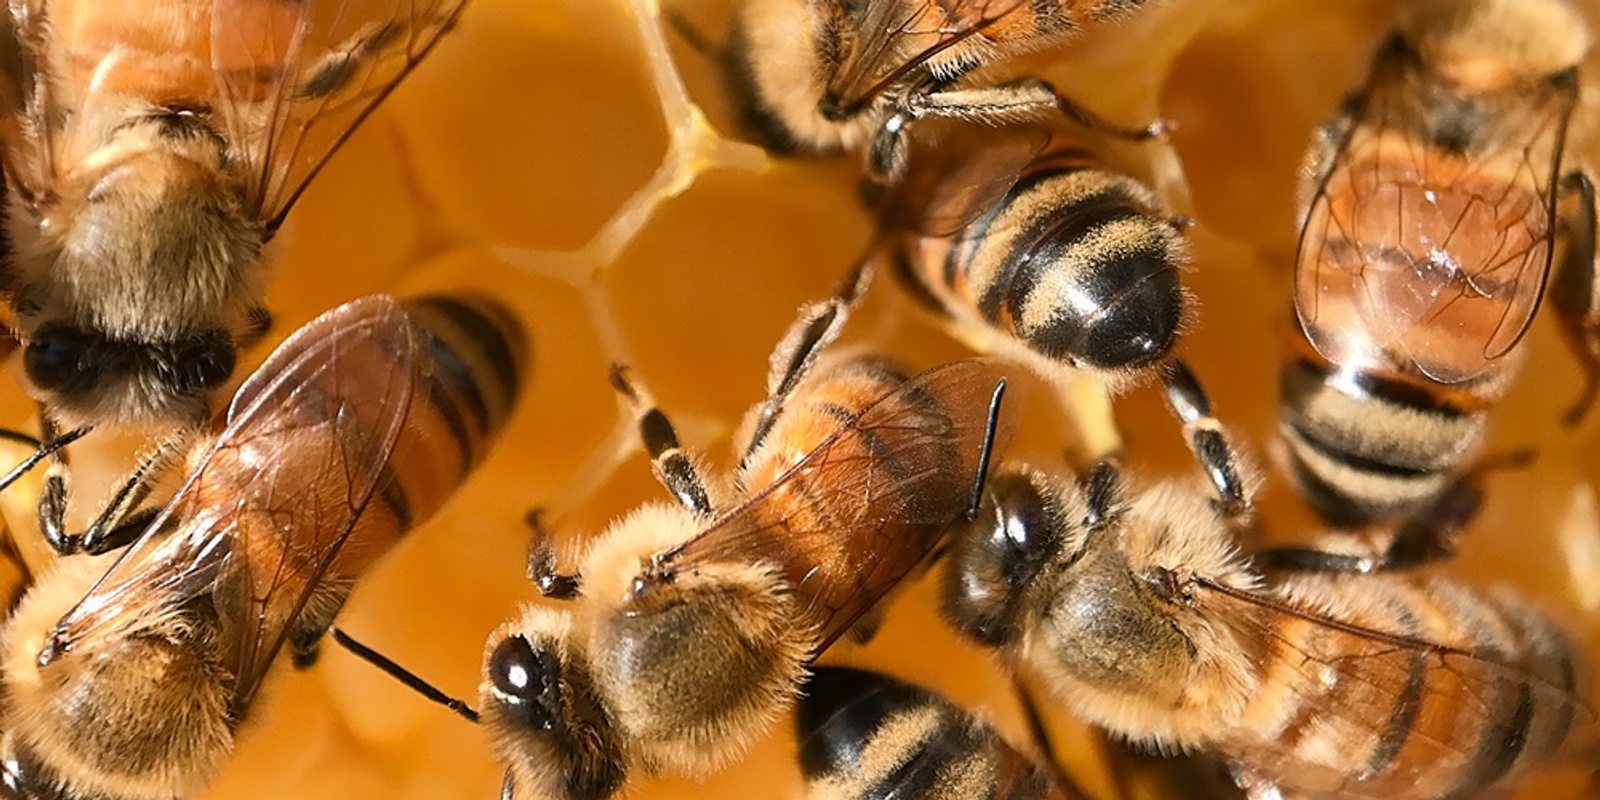 Introduction to Beekeeping Course Friday 30th September 2022